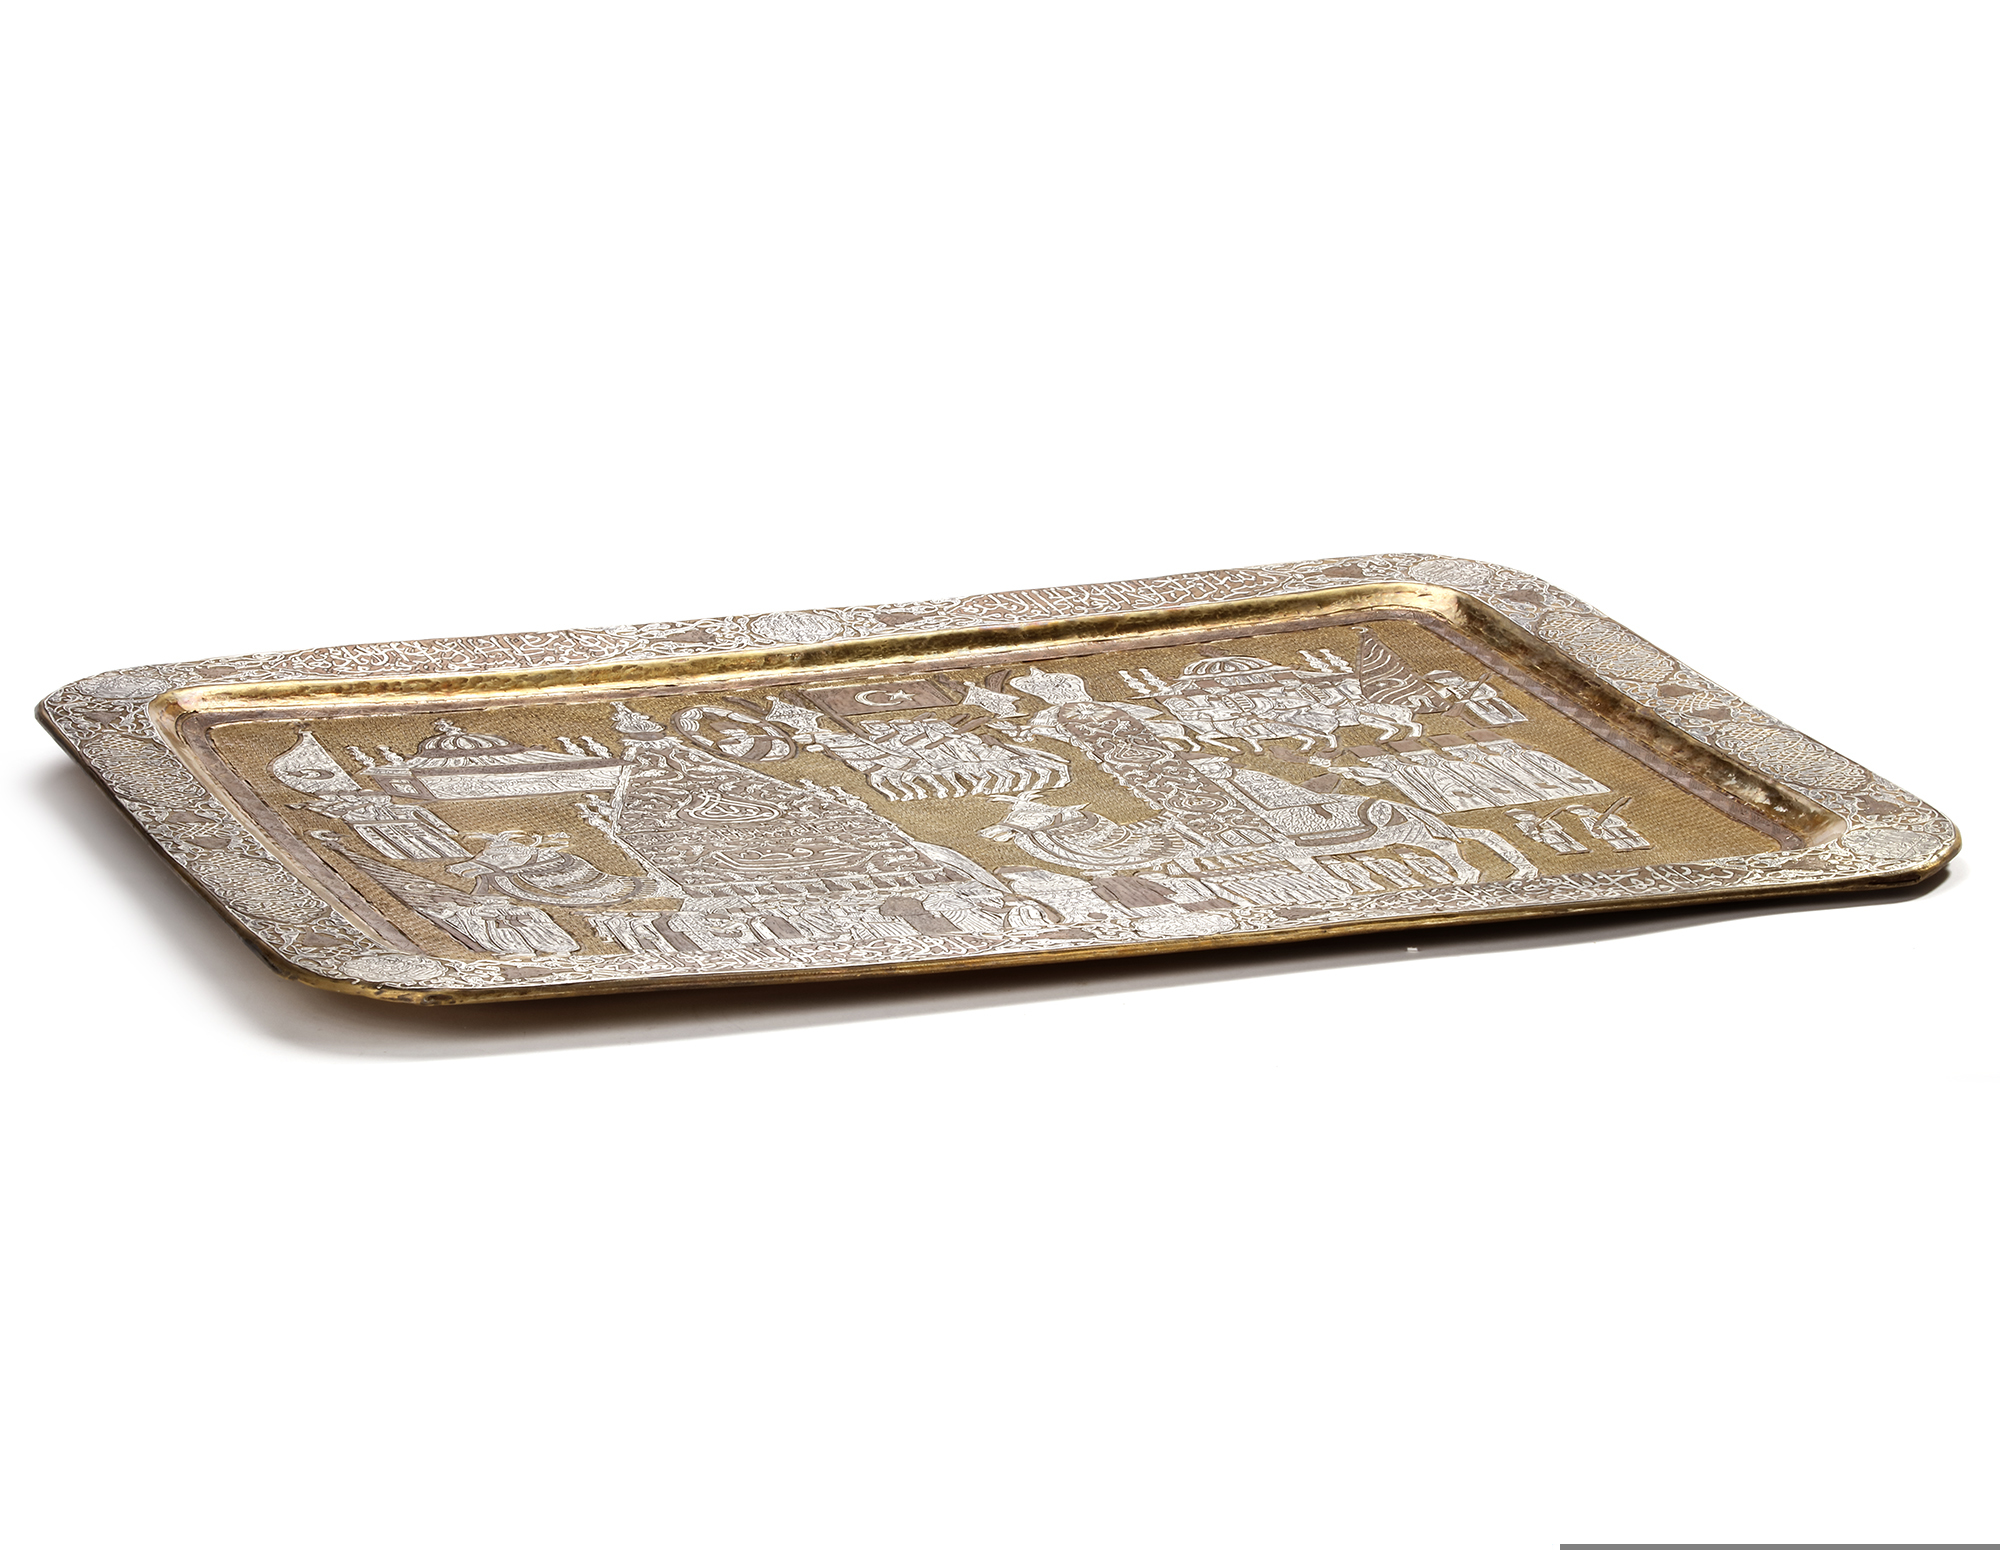 A LARGE MAMLUK REVIVAL SILVER AND COPPER INLAID BRASS TRAY DEPICTING THE MAHMAL PROCESSION TO MECCA, - Image 6 of 8